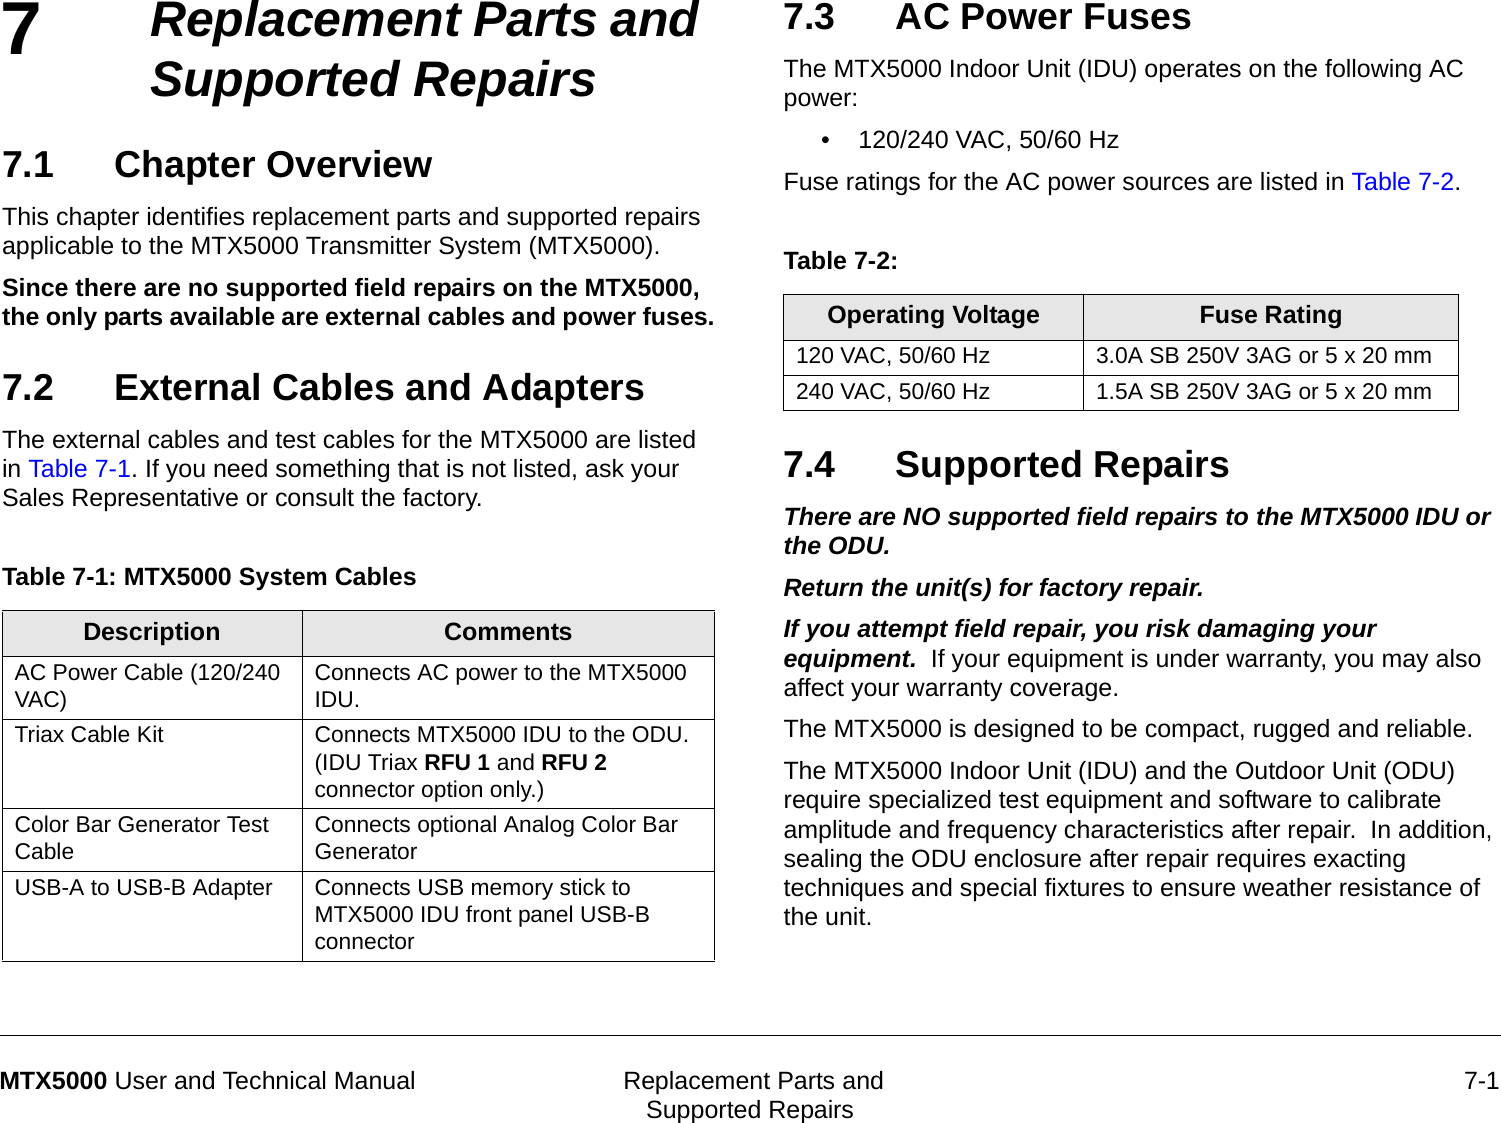 7 Replacement Parts and Supported Repairs 7-1MTX5000 User and Technical ManualReplacement Parts and Supported Repairs7.1 Chapter OverviewThis chapter identifies replacement parts and supported repairs applicable to the MTX5000 Transmitter System (MTX5000). Since there are no supported field repairs on the MTX5000, the only parts available are external cables and power fuses.7.2 External Cables and AdaptersThe external cables and test cables for the MTX5000 are listed in Table 7-1. If you need something that is not listed, ask your Sales Representative or consult the factory.Table 7-1: MTX5000 System CablesDescription CommentsAC Power Cable (120/240 VAC) Connects AC power to the MTX5000 IDU.Triax Cable Kit Connects MTX5000 IDU to the ODU.  (IDU Triax RFU 1 and RFU 2 connector option only.)Color Bar Generator Test Cable  Connects optional Analog Color Bar Generator USB-A to USB-B Adapter Connects USB memory stick to MTX5000 IDU front panel USB-B connector7.3 AC Power FusesThe MTX5000 Indoor Unit (IDU) operates on the following AC power:• 120/240 VAC, 50/60 HzFuse ratings for the AC power sources are listed in Table 7-2.  7.4 Supported Repairs There are NO supported field repairs to the MTX5000 IDU or the ODU. Return the unit(s) for factory repair. If you attempt field repair, you risk damaging your equipment.  If your equipment is under warranty, you may also affect your warranty coverage.  The MTX5000 is designed to be compact, rugged and reliable. The MTX5000 Indoor Unit (IDU) and the Outdoor Unit (ODU) require specialized test equipment and software to calibrate amplitude and frequency characteristics after repair.  In addition, sealing the ODU enclosure after repair requires exacting techniques and special fixtures to ensure weather resistance of the unit.    Table 7-2:   Operating Voltage Fuse Rating120 VAC, 50/60 Hz 3.0A SB 250V 3AG or 5 x 20 mm240 VAC, 50/60 Hz 1.5A SB 250V 3AG or 5 x 20 mm